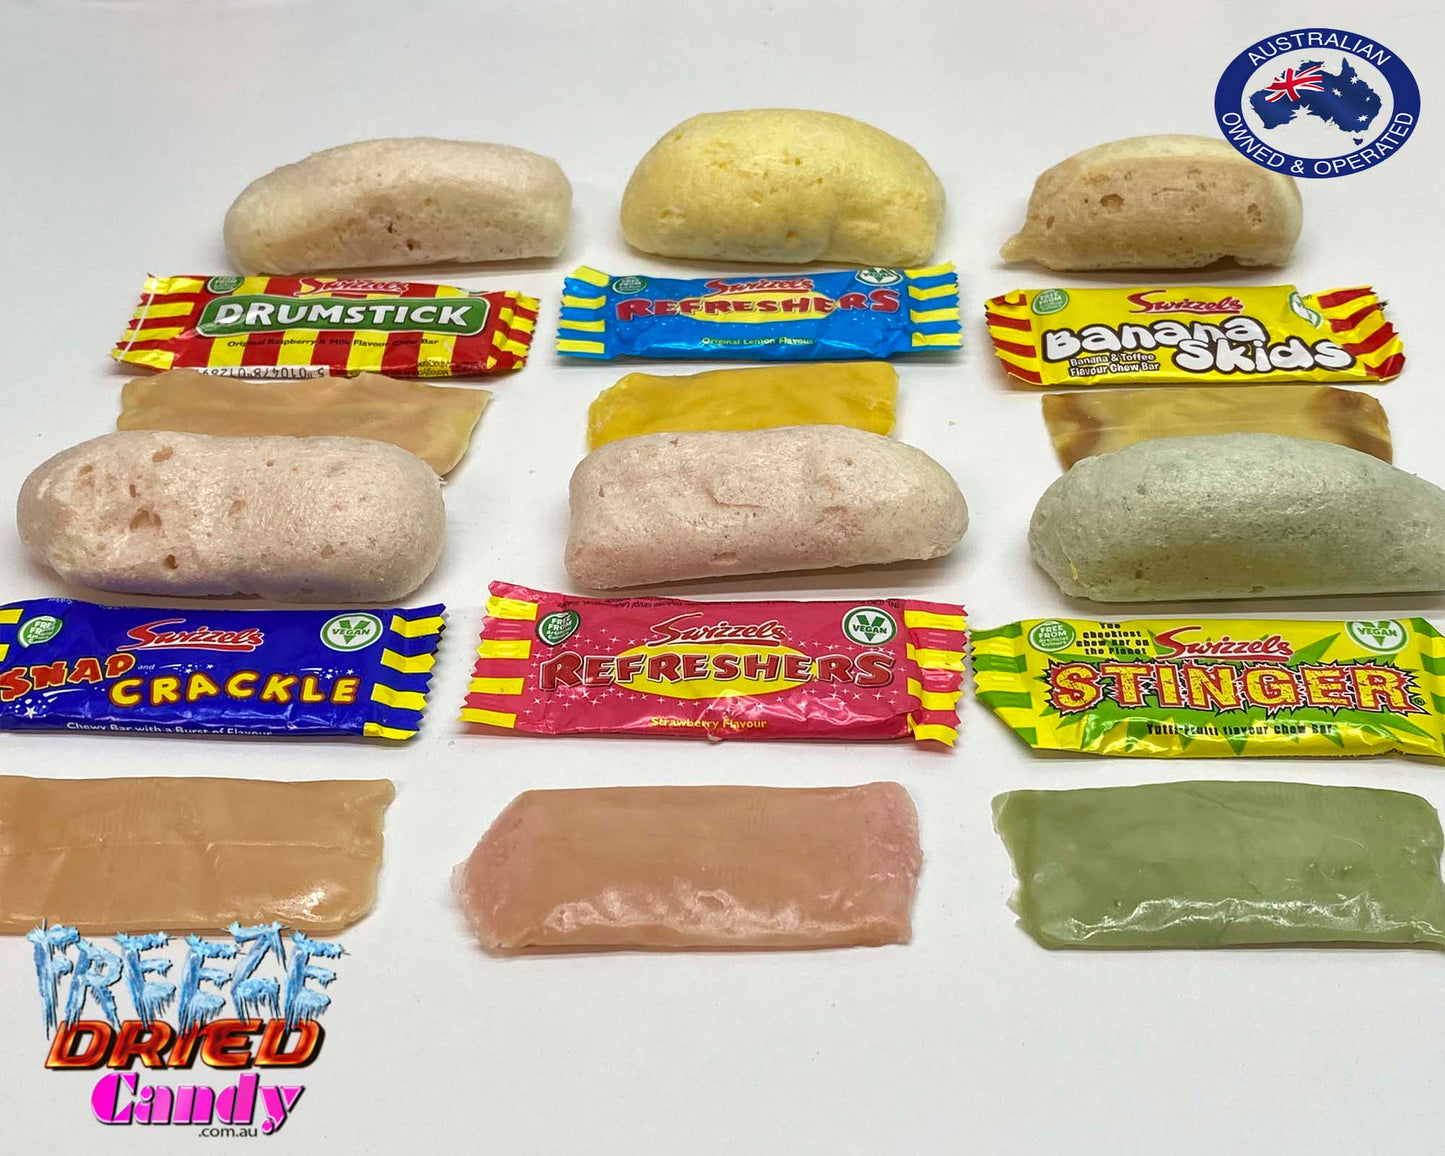 Freeze Dried Swizzels - Mini Me Chew Bars - Freeze Dried Candy Lollies  We have taken the classic Swizzels Mini Me Chew bar and put it through the freeze drying process, they keep their wonderful flavors but ditch the chewy texture. They are now little bursts of crunchy freeze dried goodness in your favorite Swizzel Chew bar. 